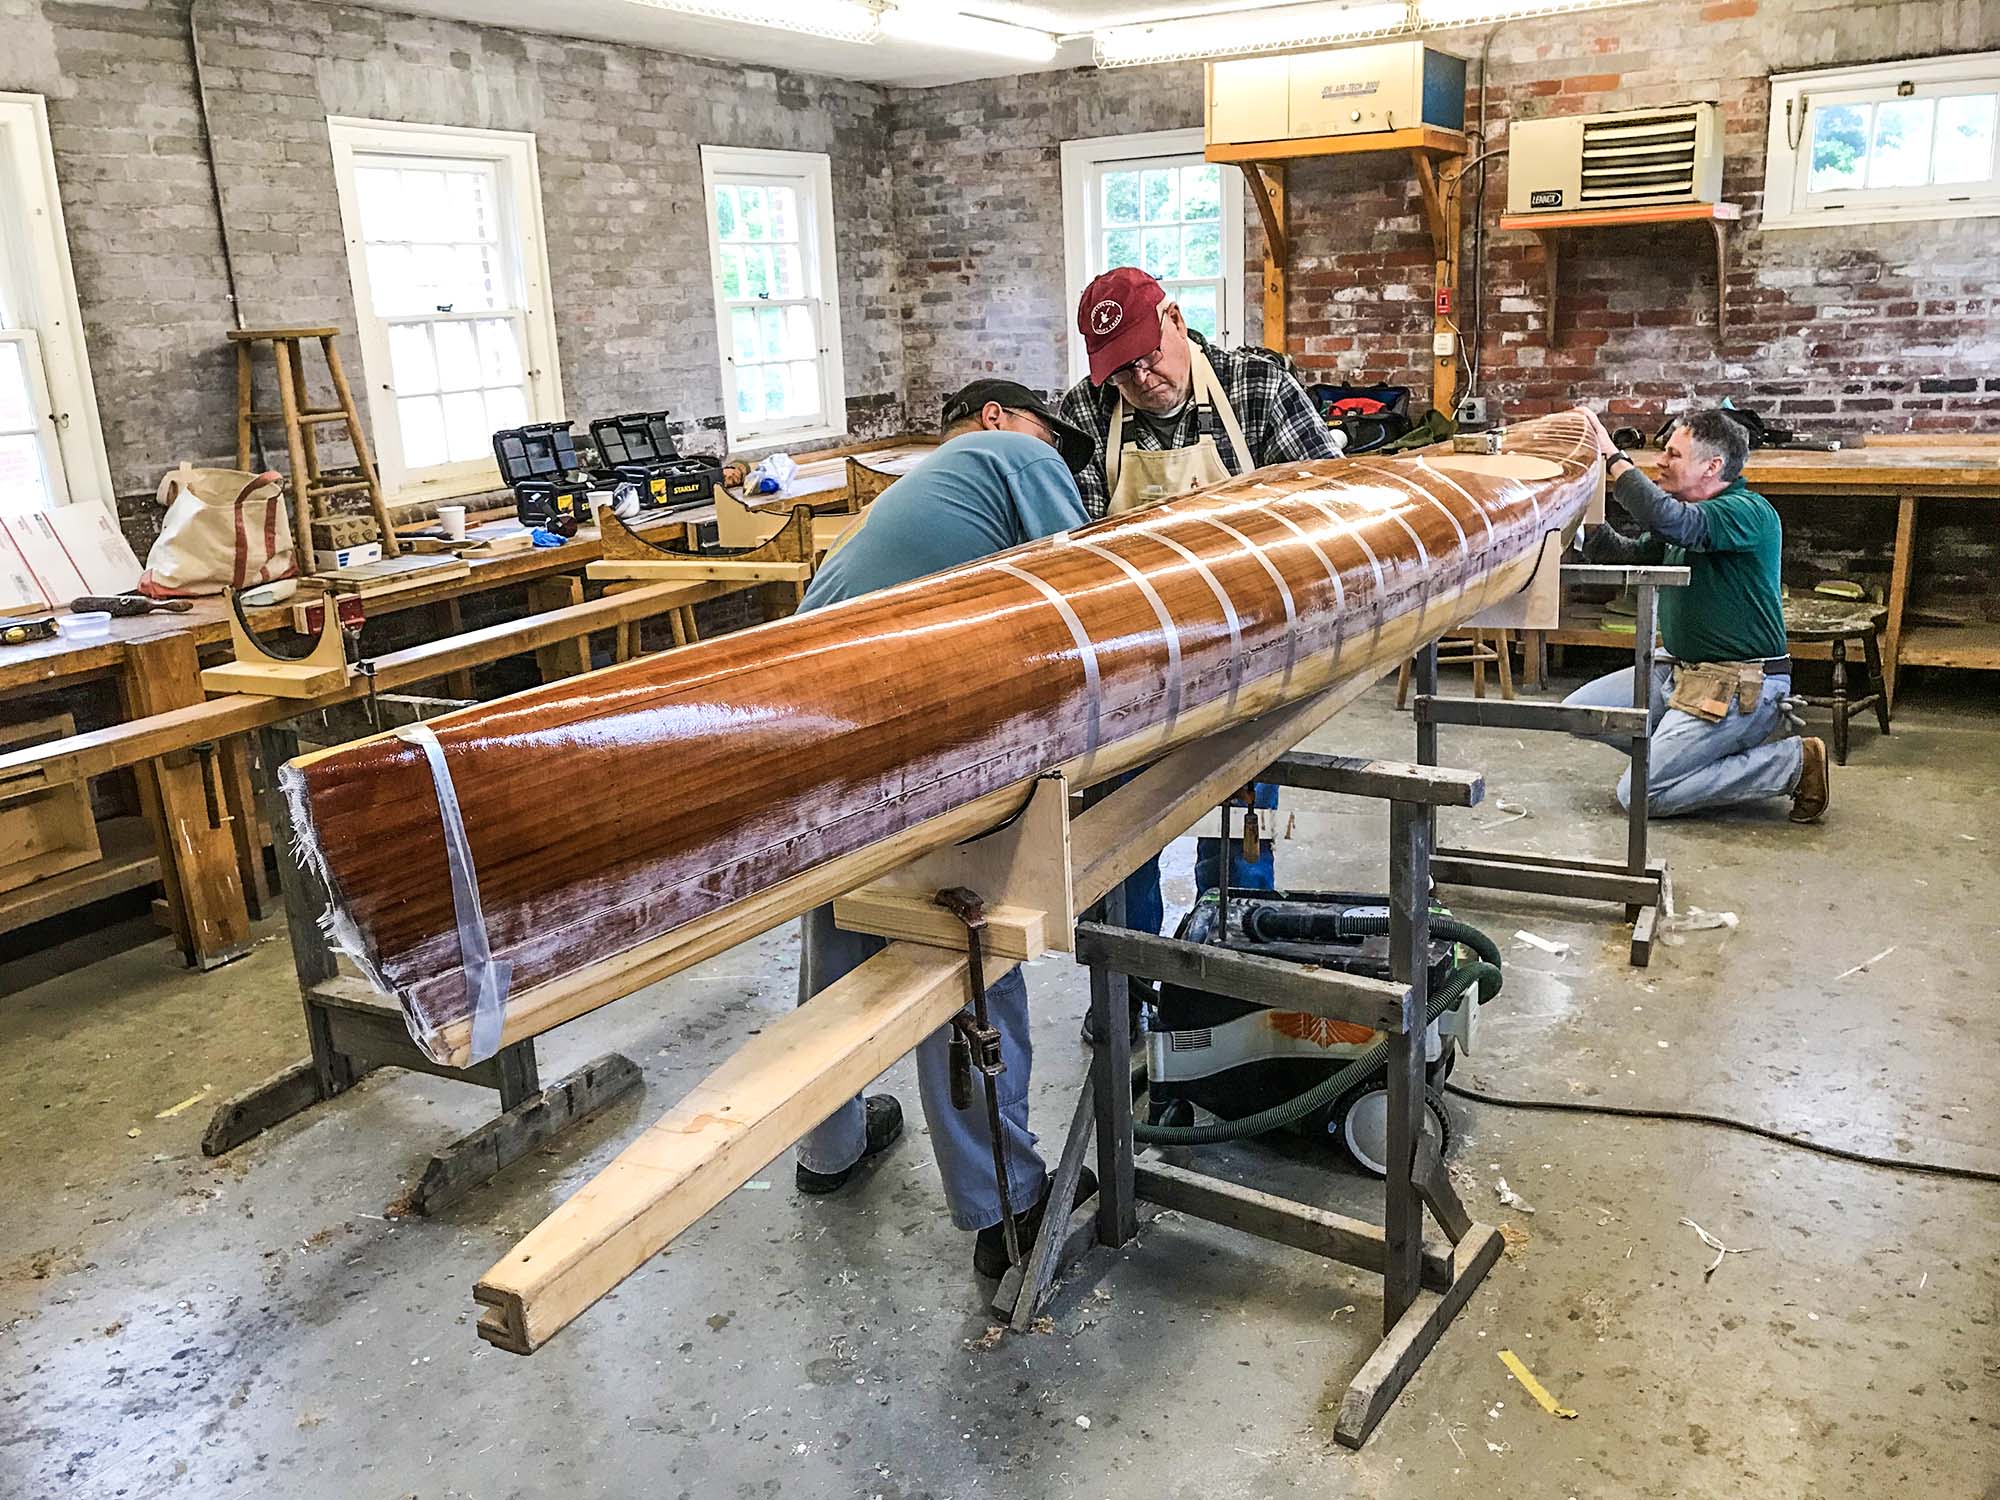 Learn kayak building at the WoodenBoat School